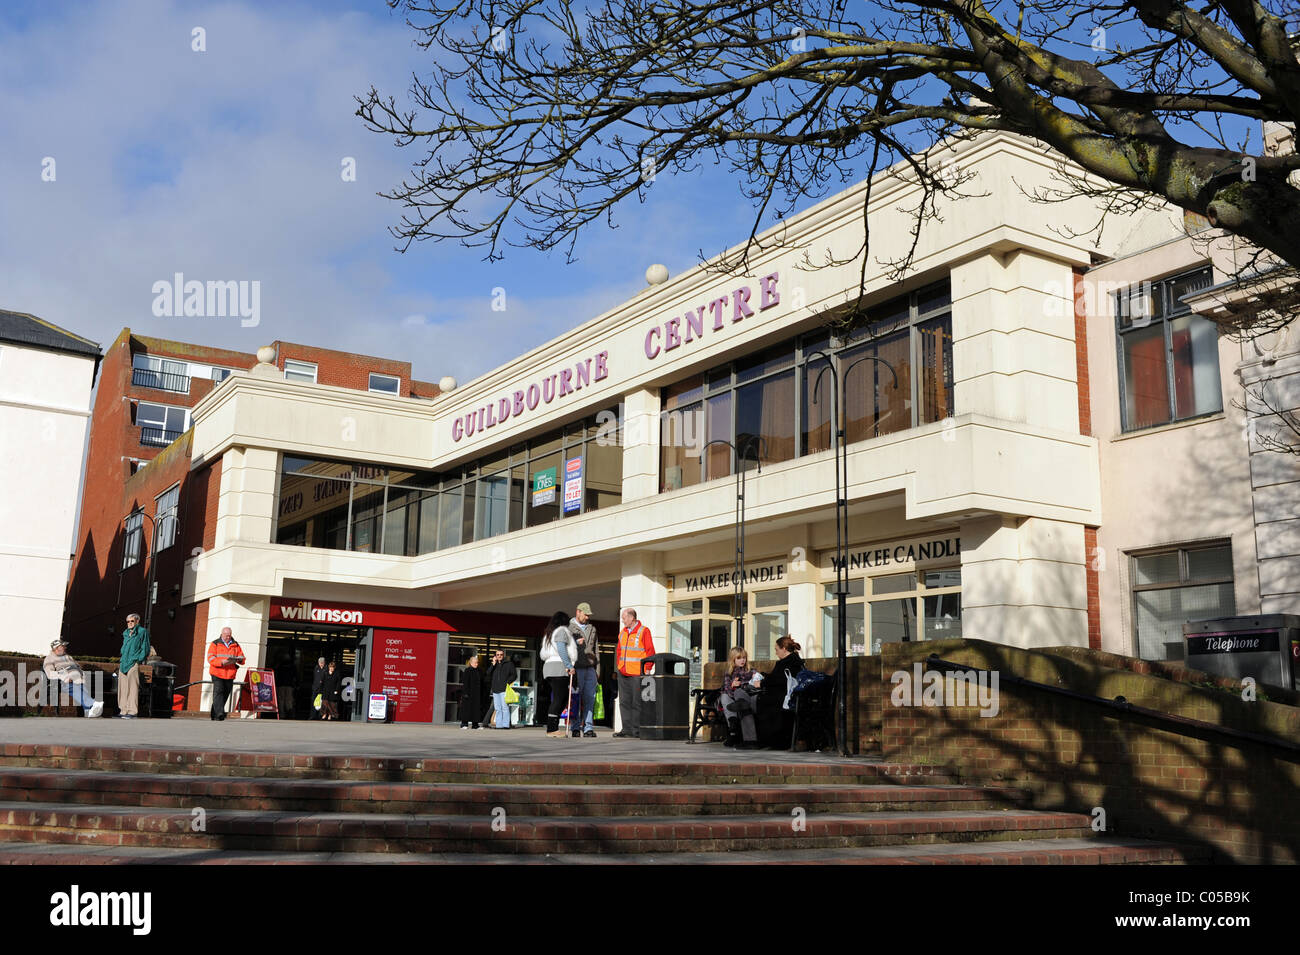 The Guildbourne Centre shopping mall in Worthing West Sussex UK Stock Photo